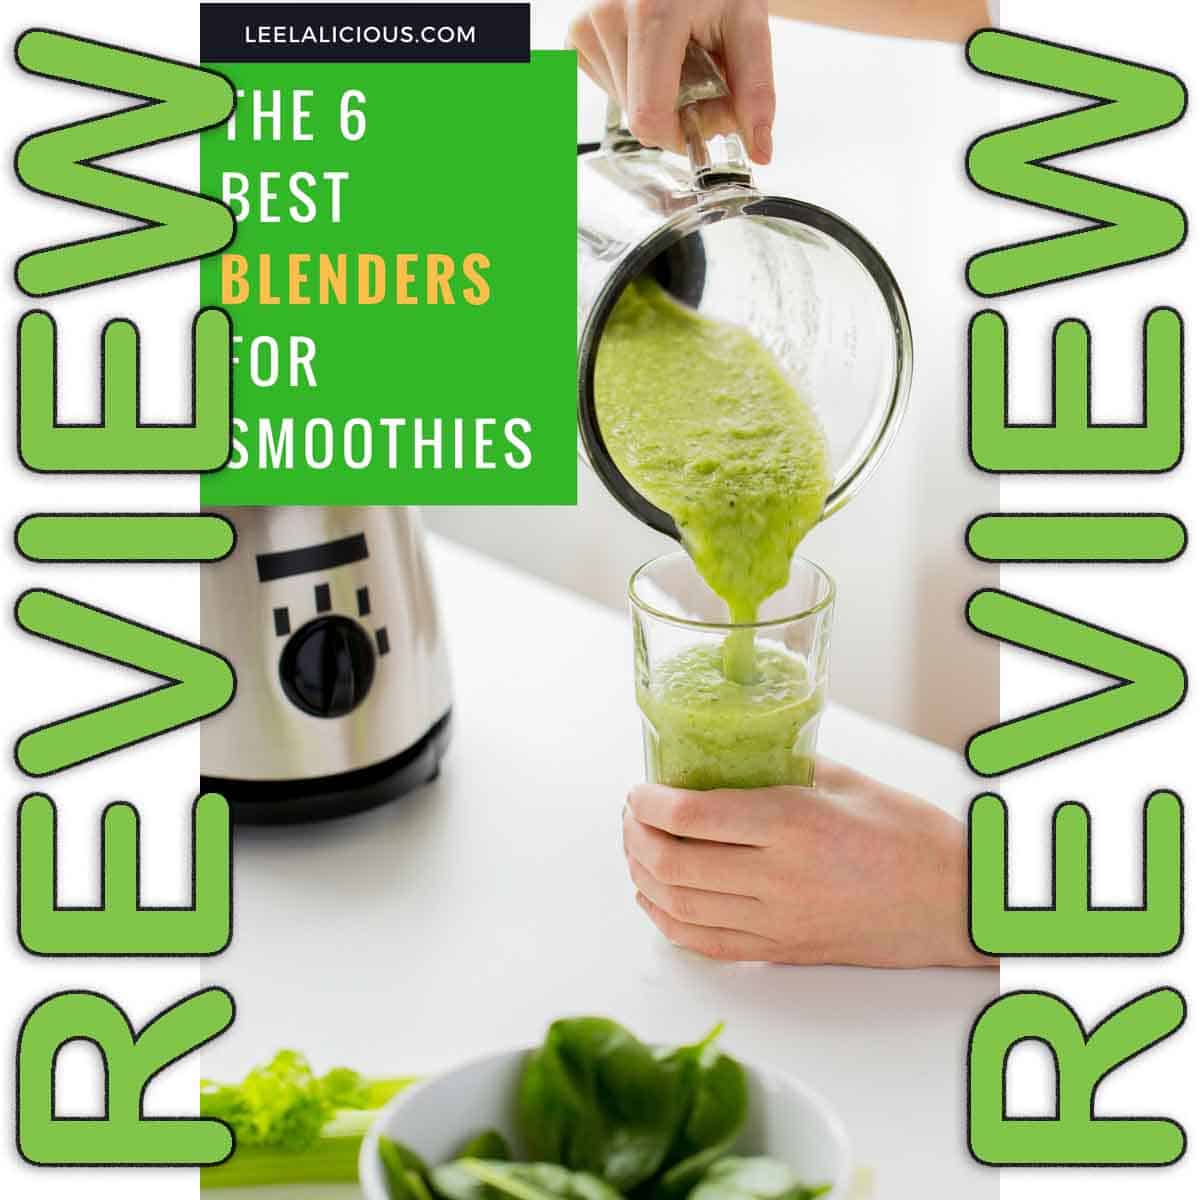 https://leelalicious.com/wp-content/uploads/2017/01/BEST-SMOOTHIE-BLENDERS-review.jpg